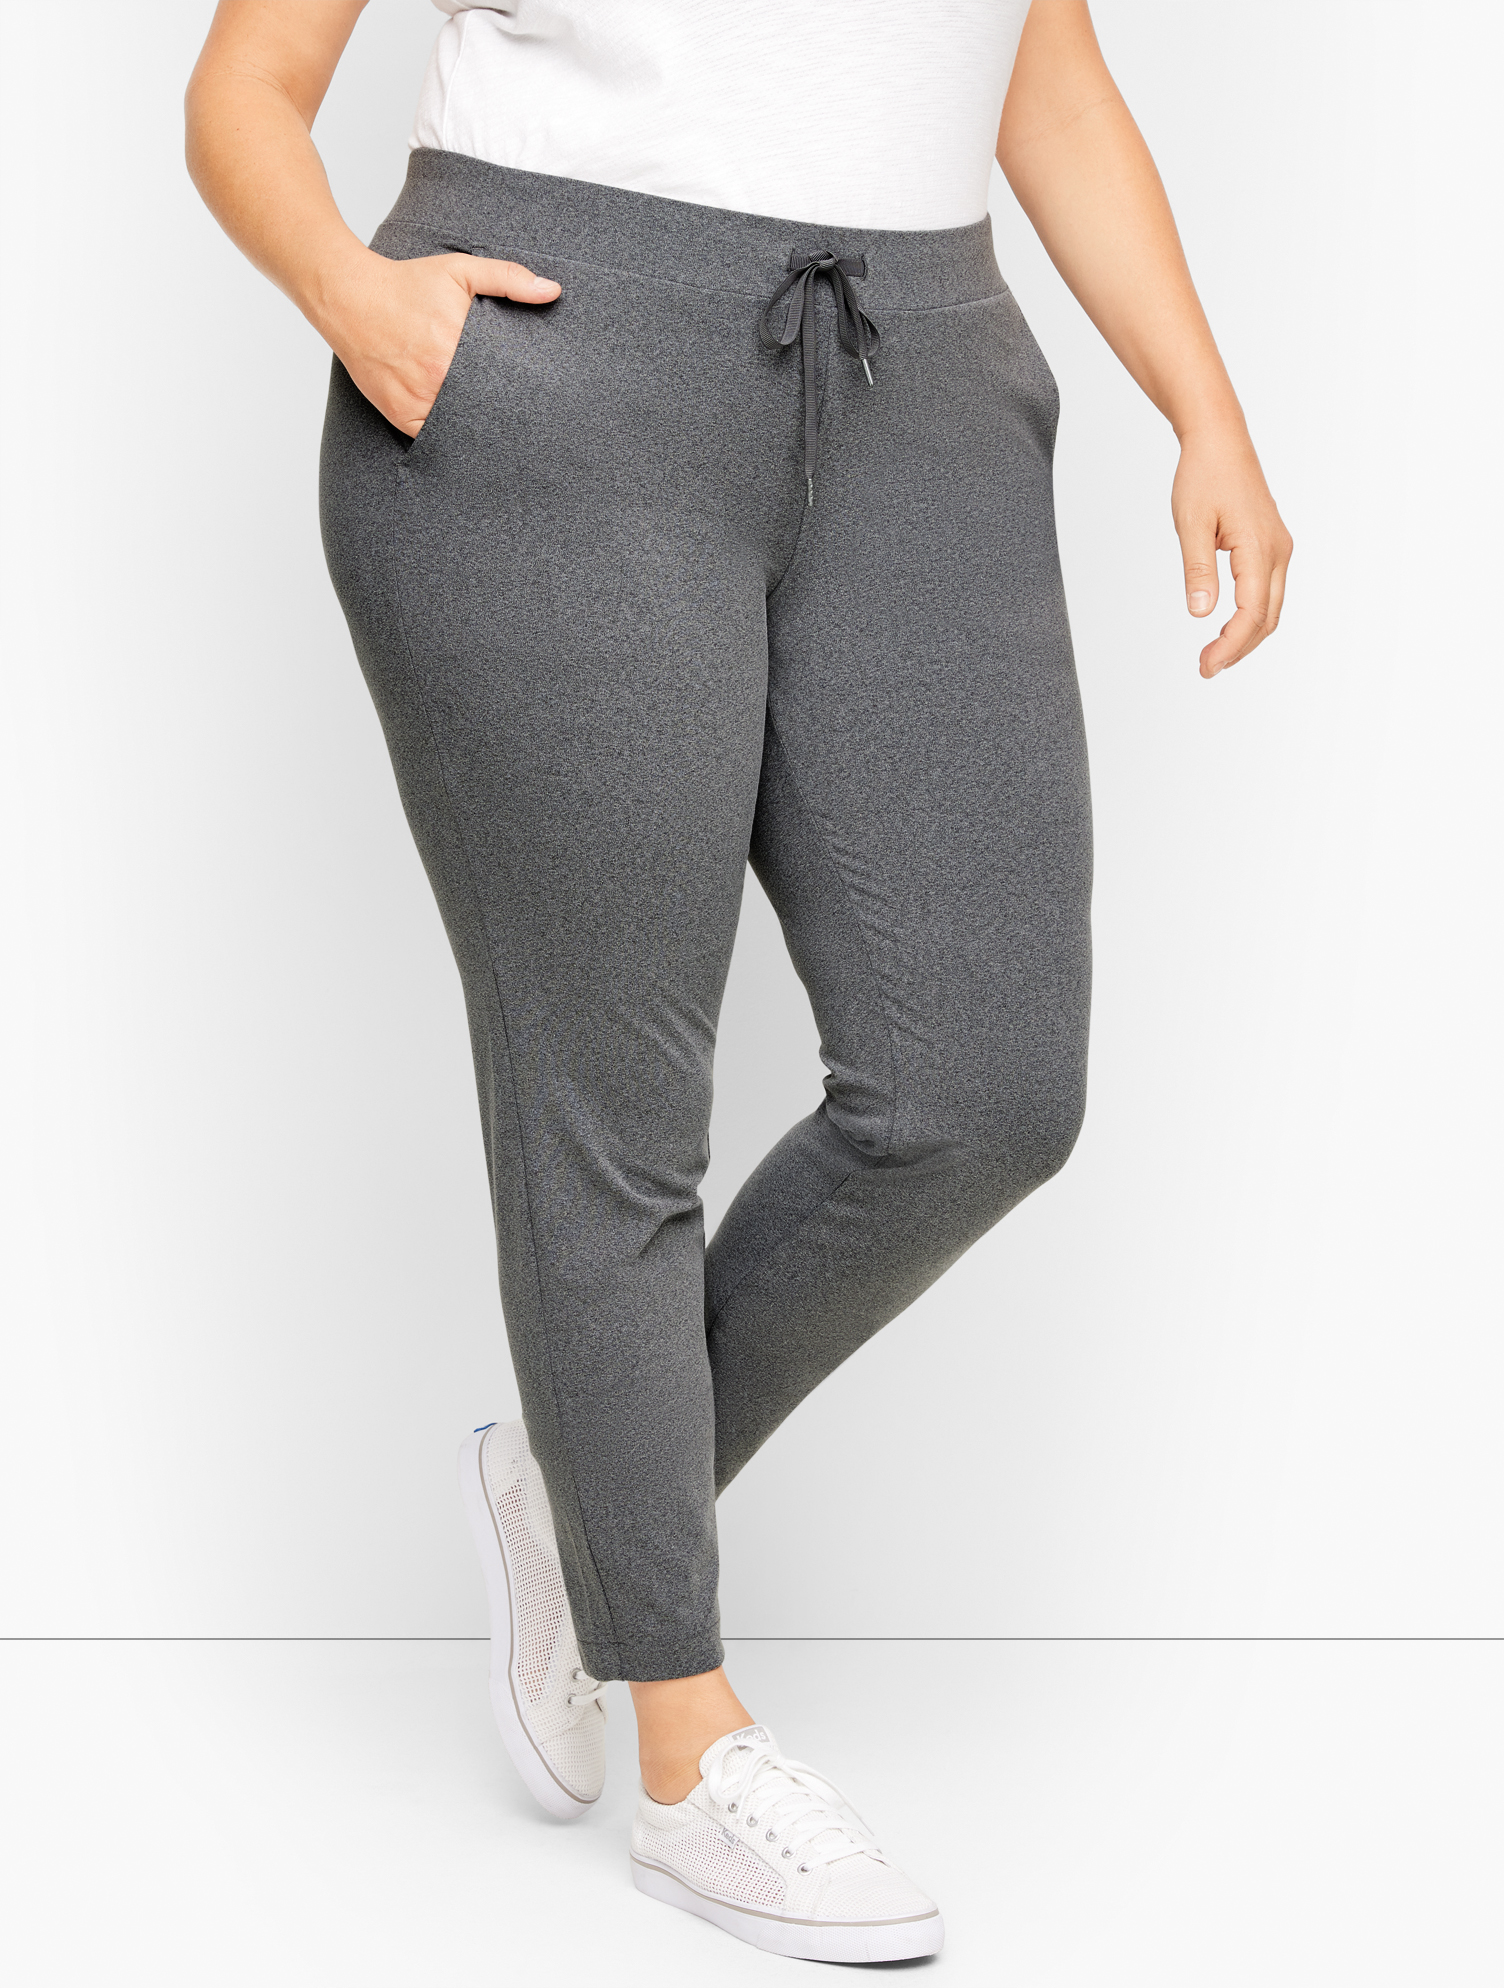 Talbots Out & About Stretch Jogger Pants - Shadow Heather - 3x